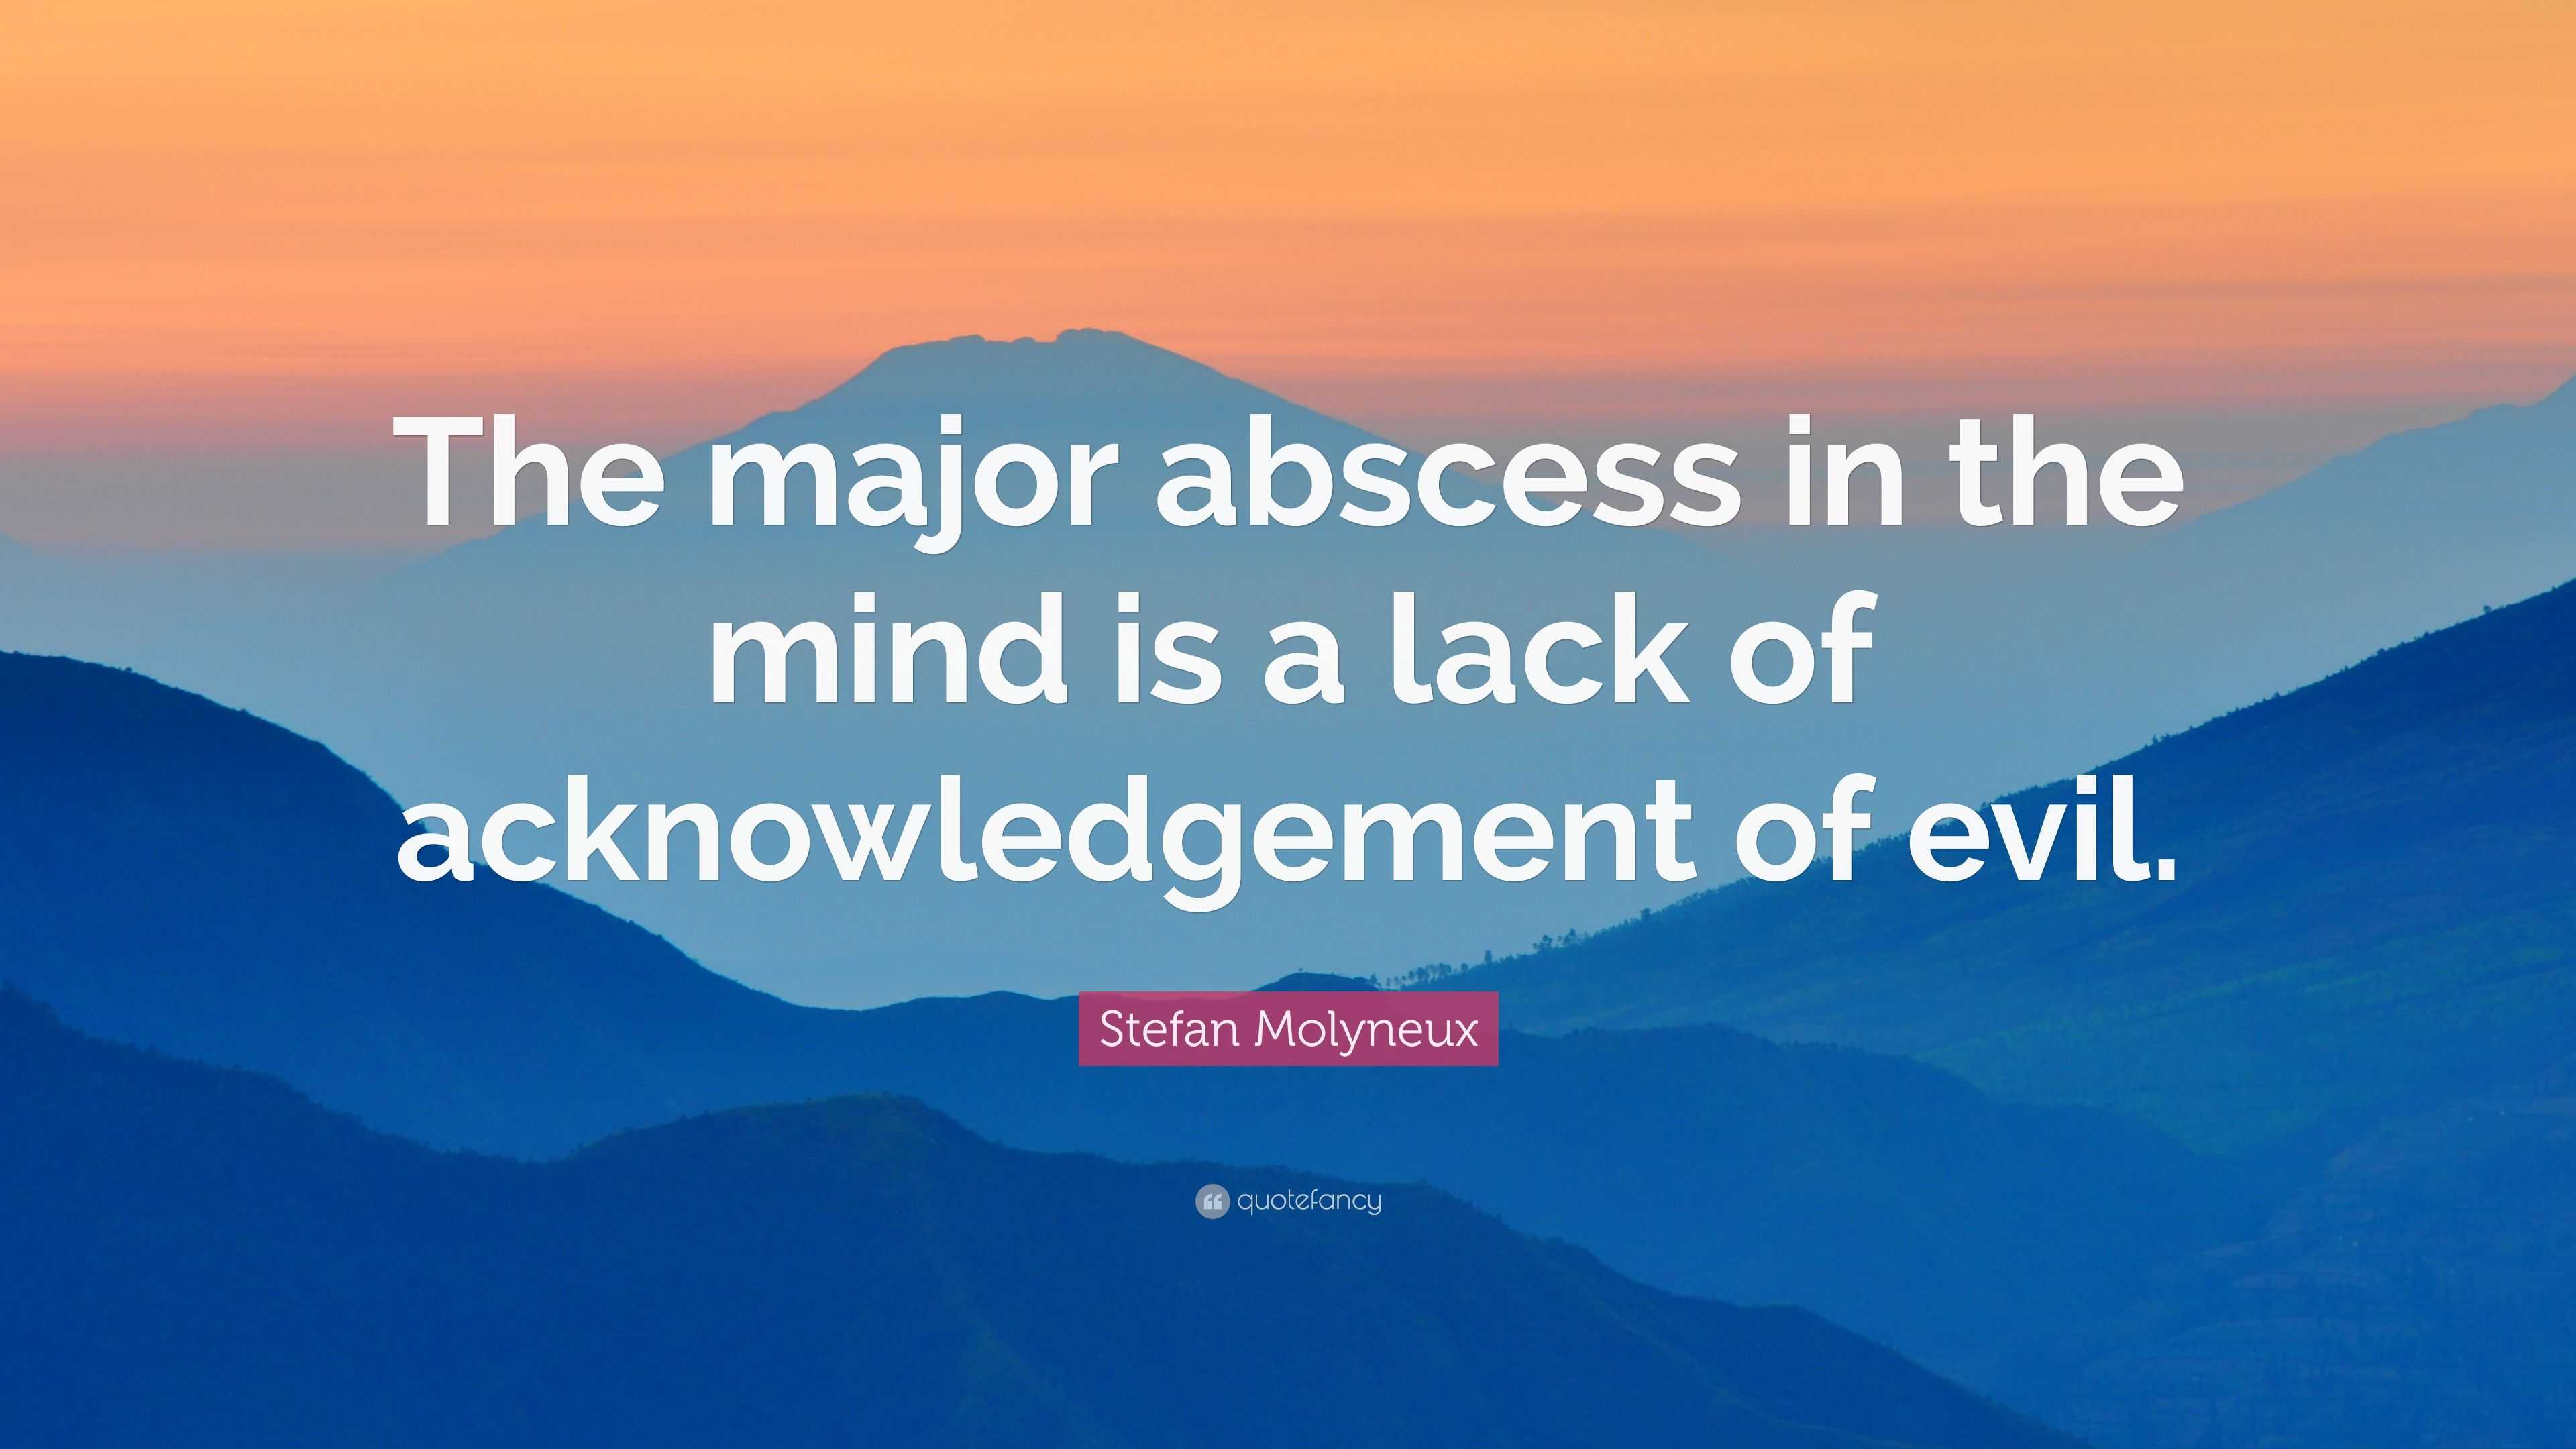 Stefan Molyneux Quote: "The major abscess in the mind is a ...